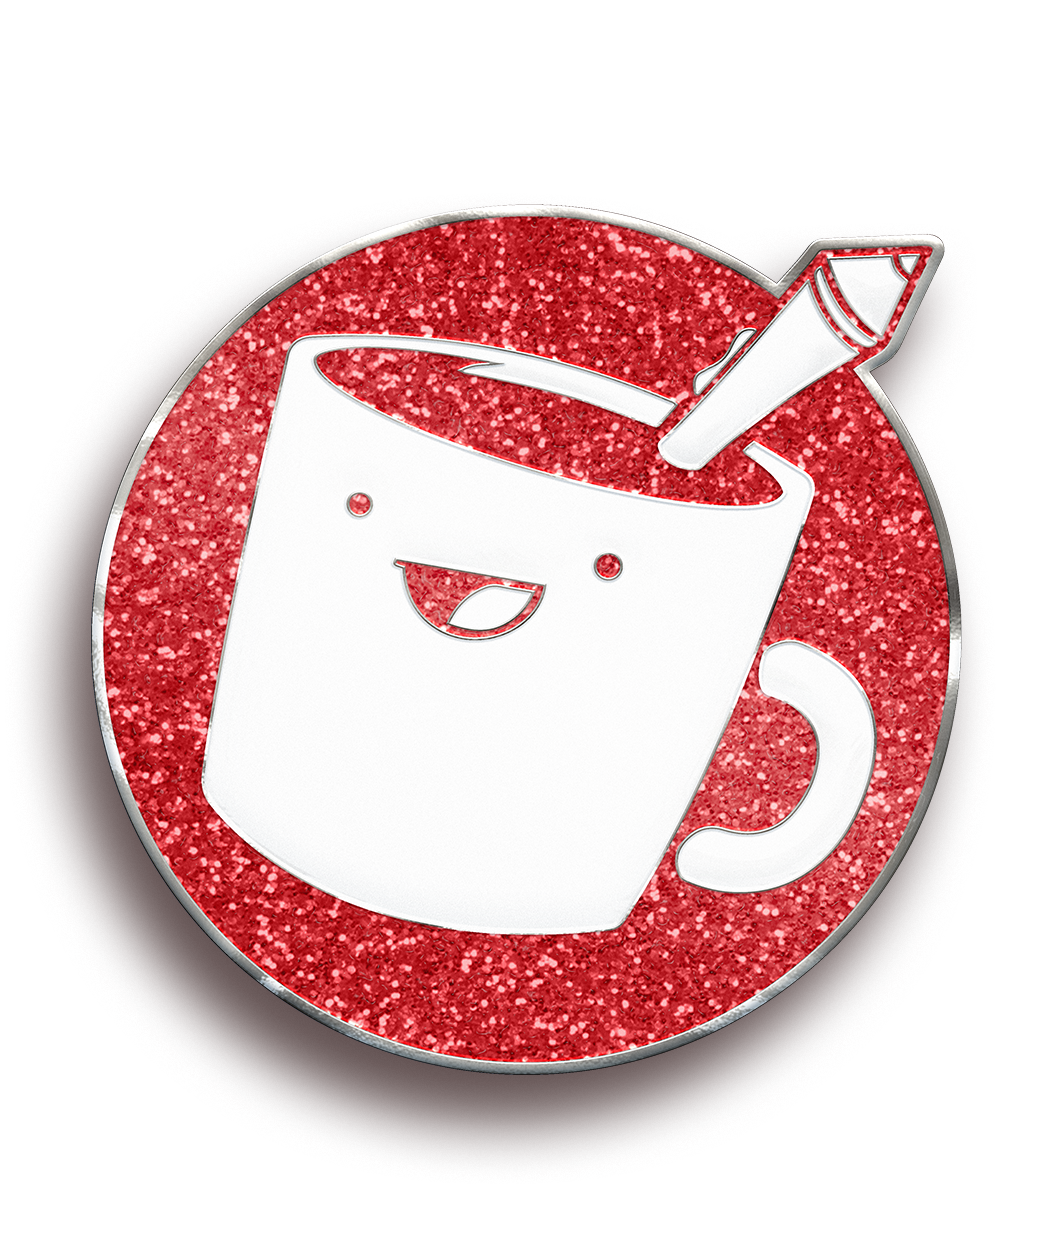 A circular, red sparkly pin with the white Drawfee logo that looks like a white mug with a smile and pen sticking out.